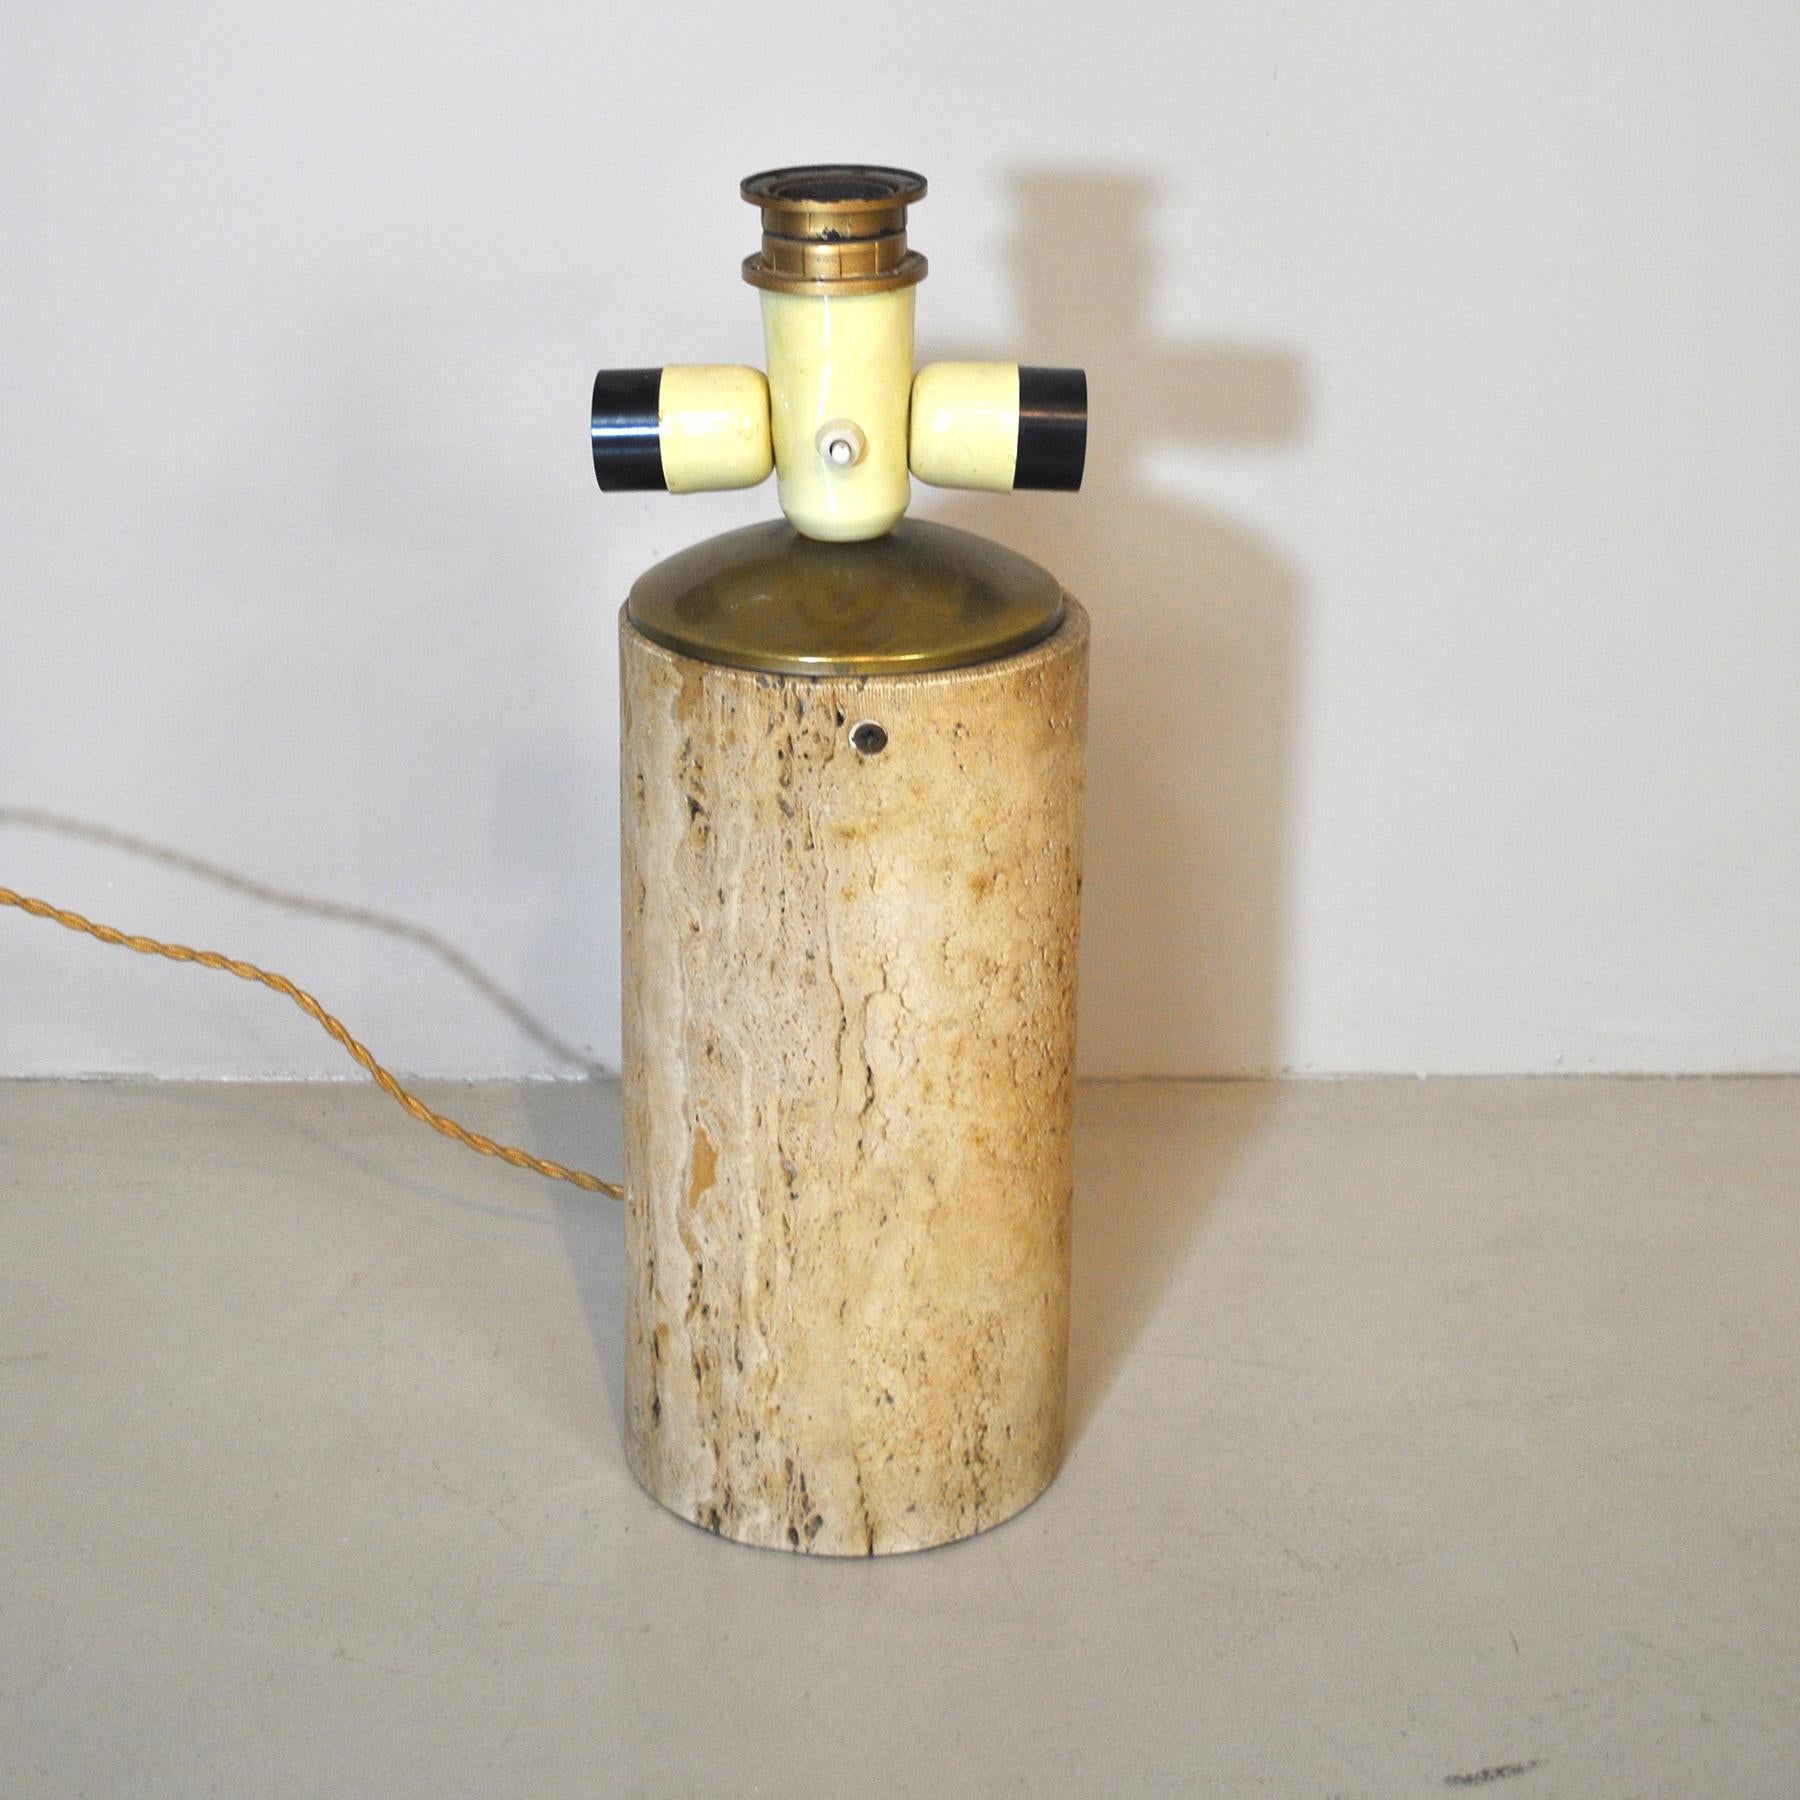 Amazing table lamp by Goffredo Reggiani in travertine marble from the 1960s.
The lamp is sold without the lampshade in the picture, but it can be requested in the form, sizes and colors at will with an extra price.